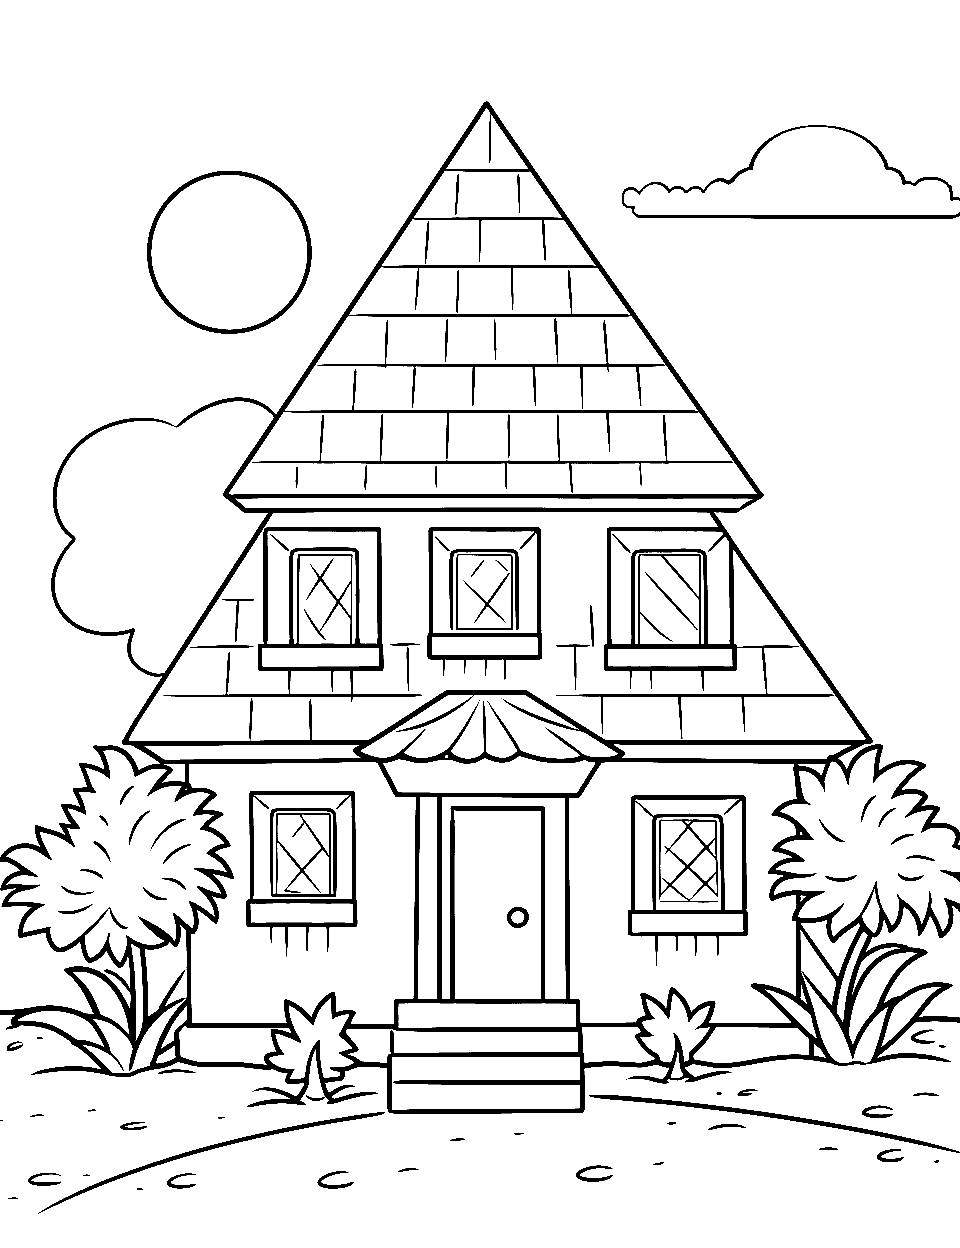 Historical Pyramid Dwelling Coloring Page - A house shaped like a pyramid.